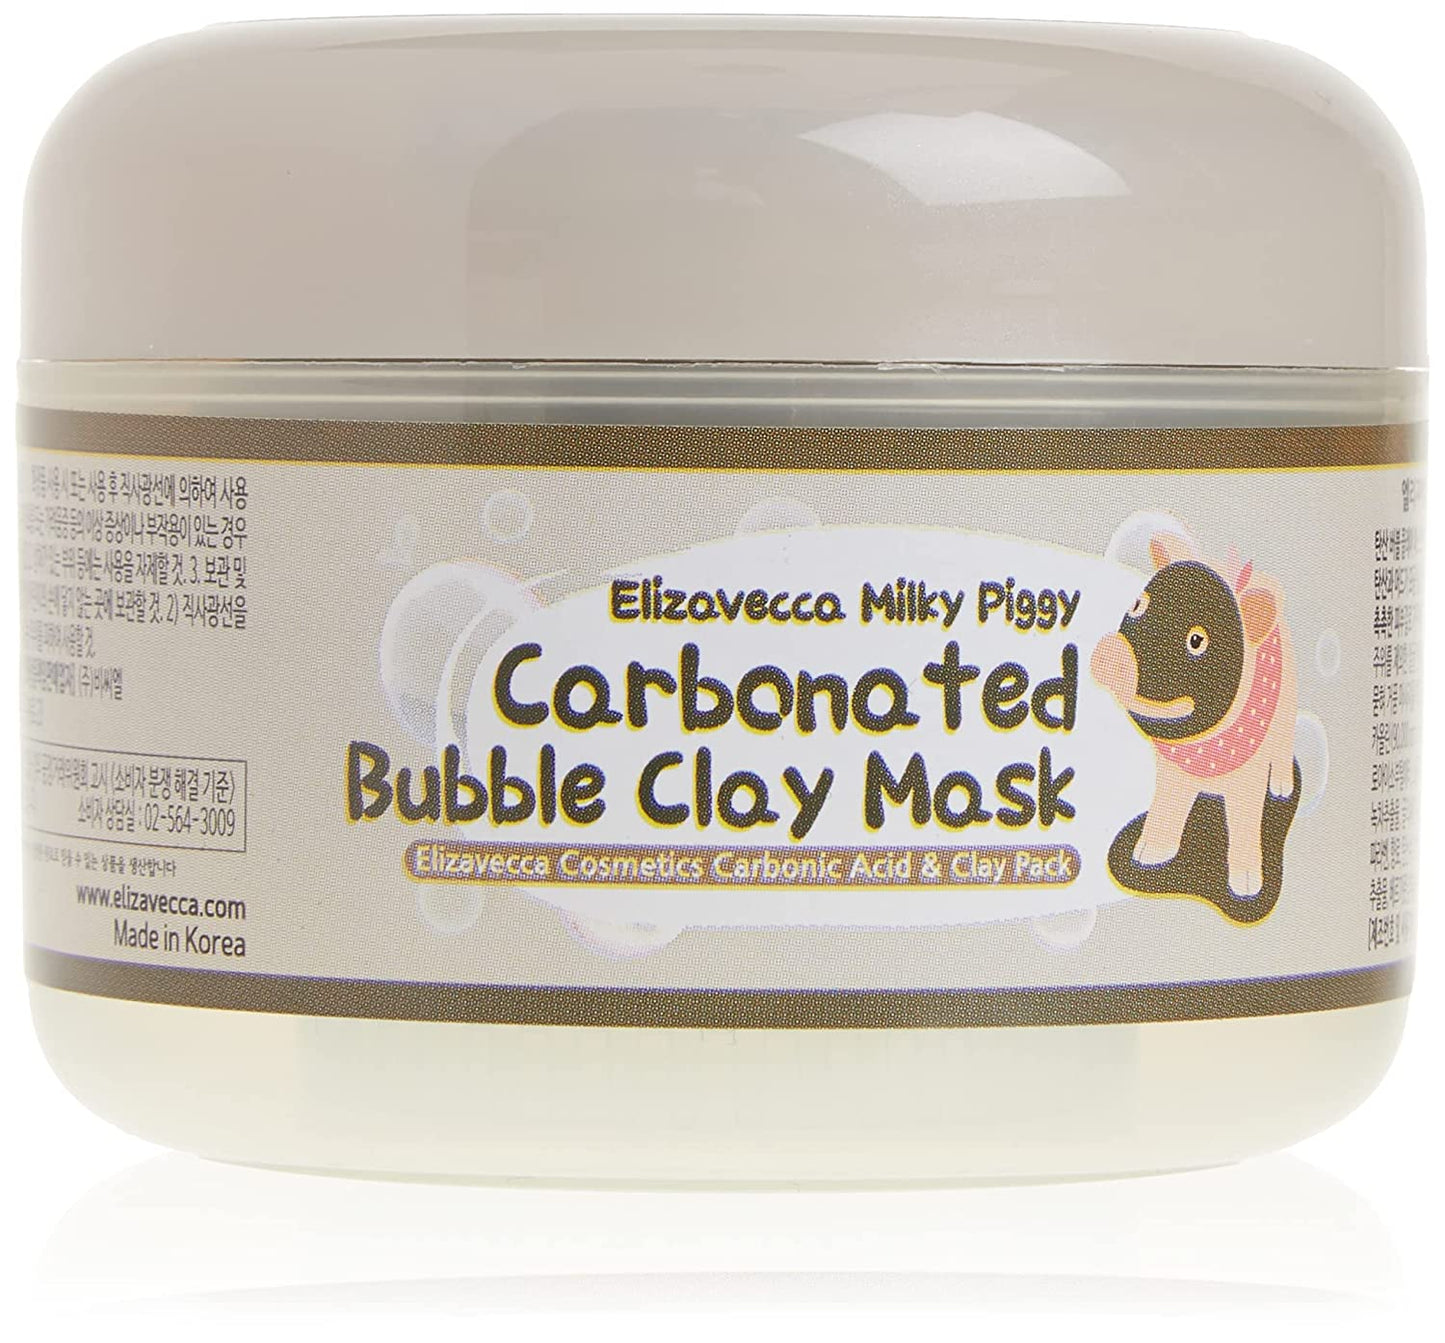  Milky Piggy Carbonated Bubble Clay Mask